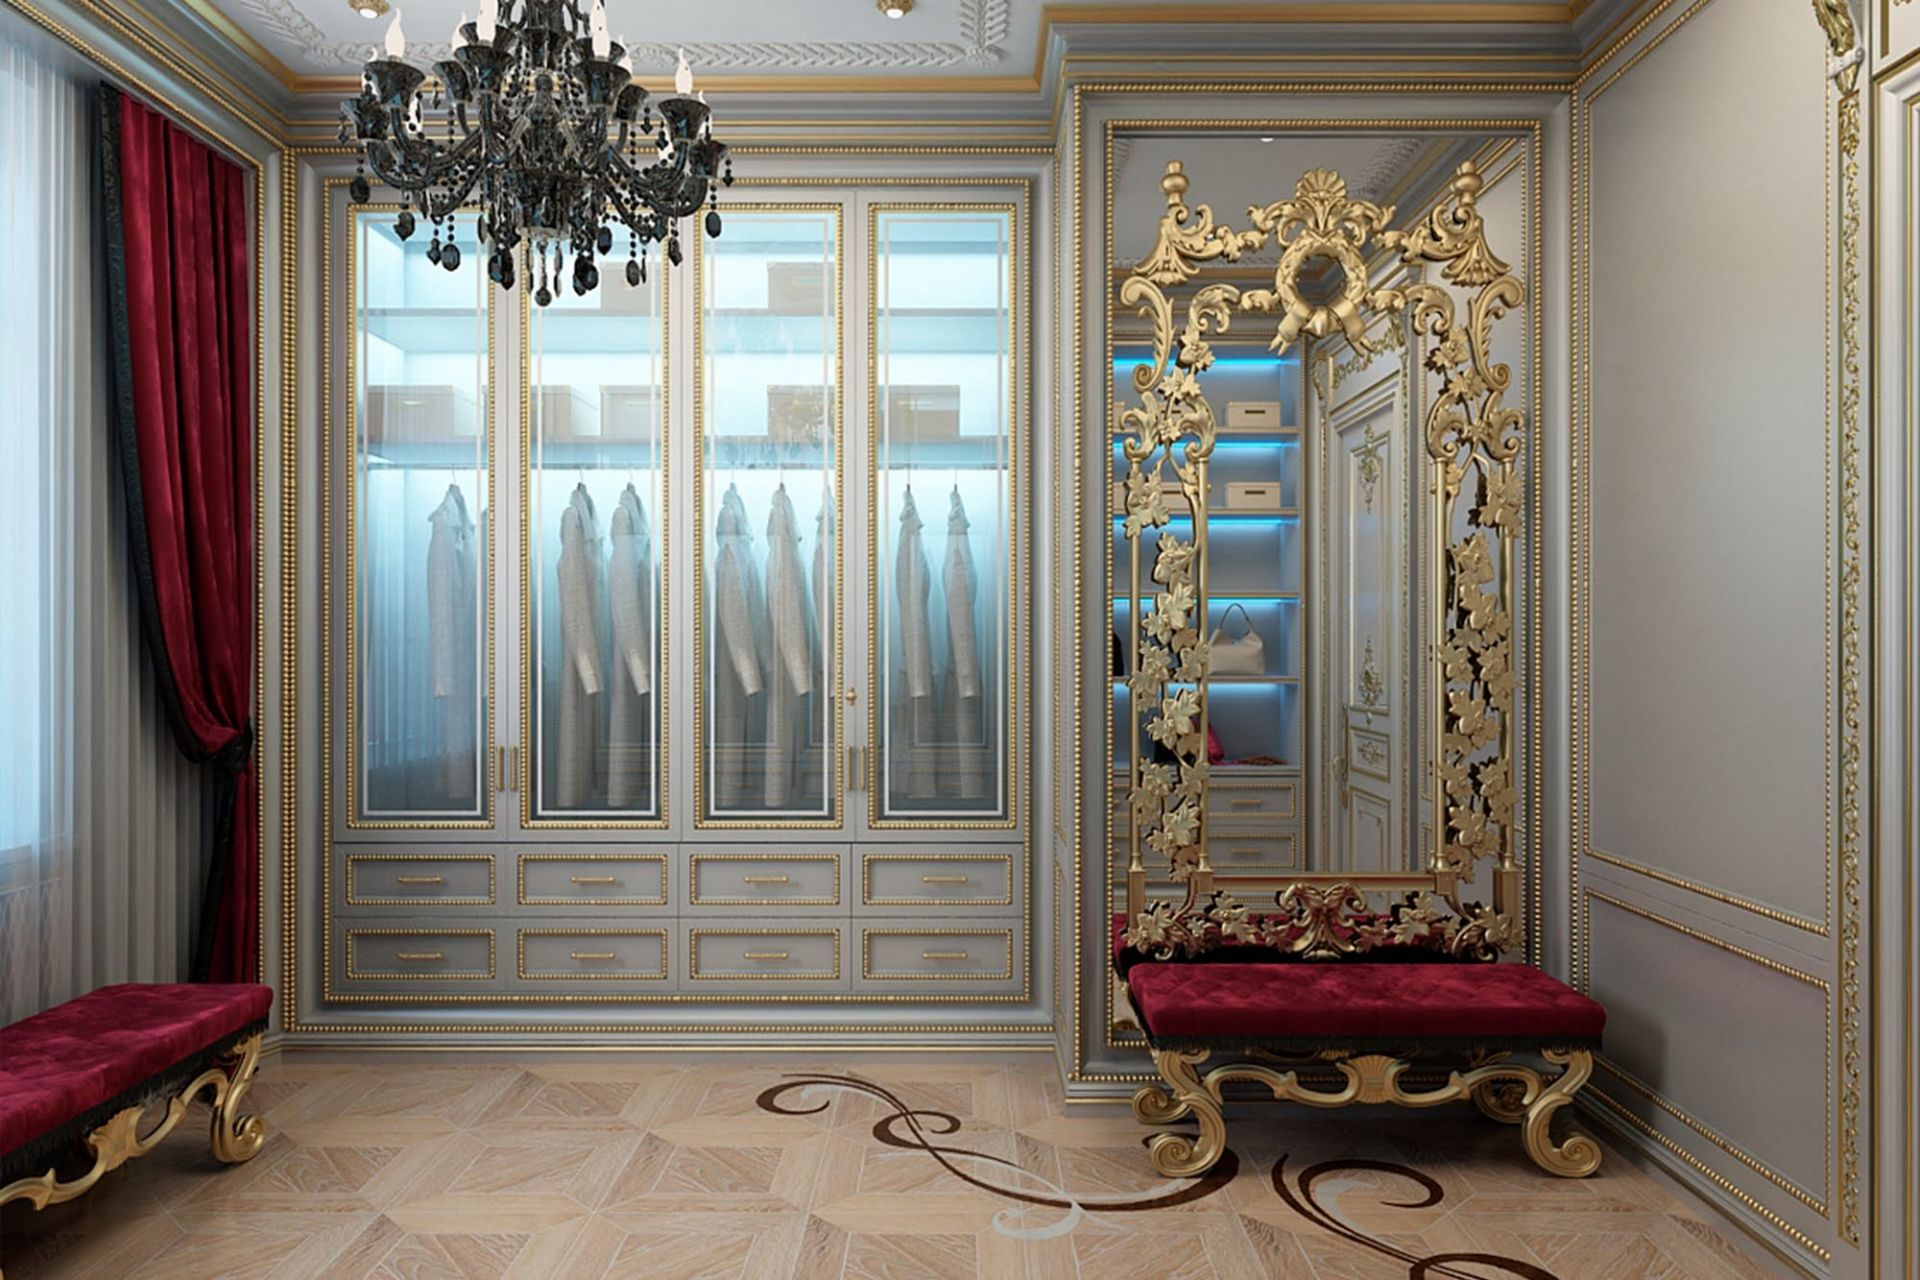 Dressing room interior with the Empire style elements